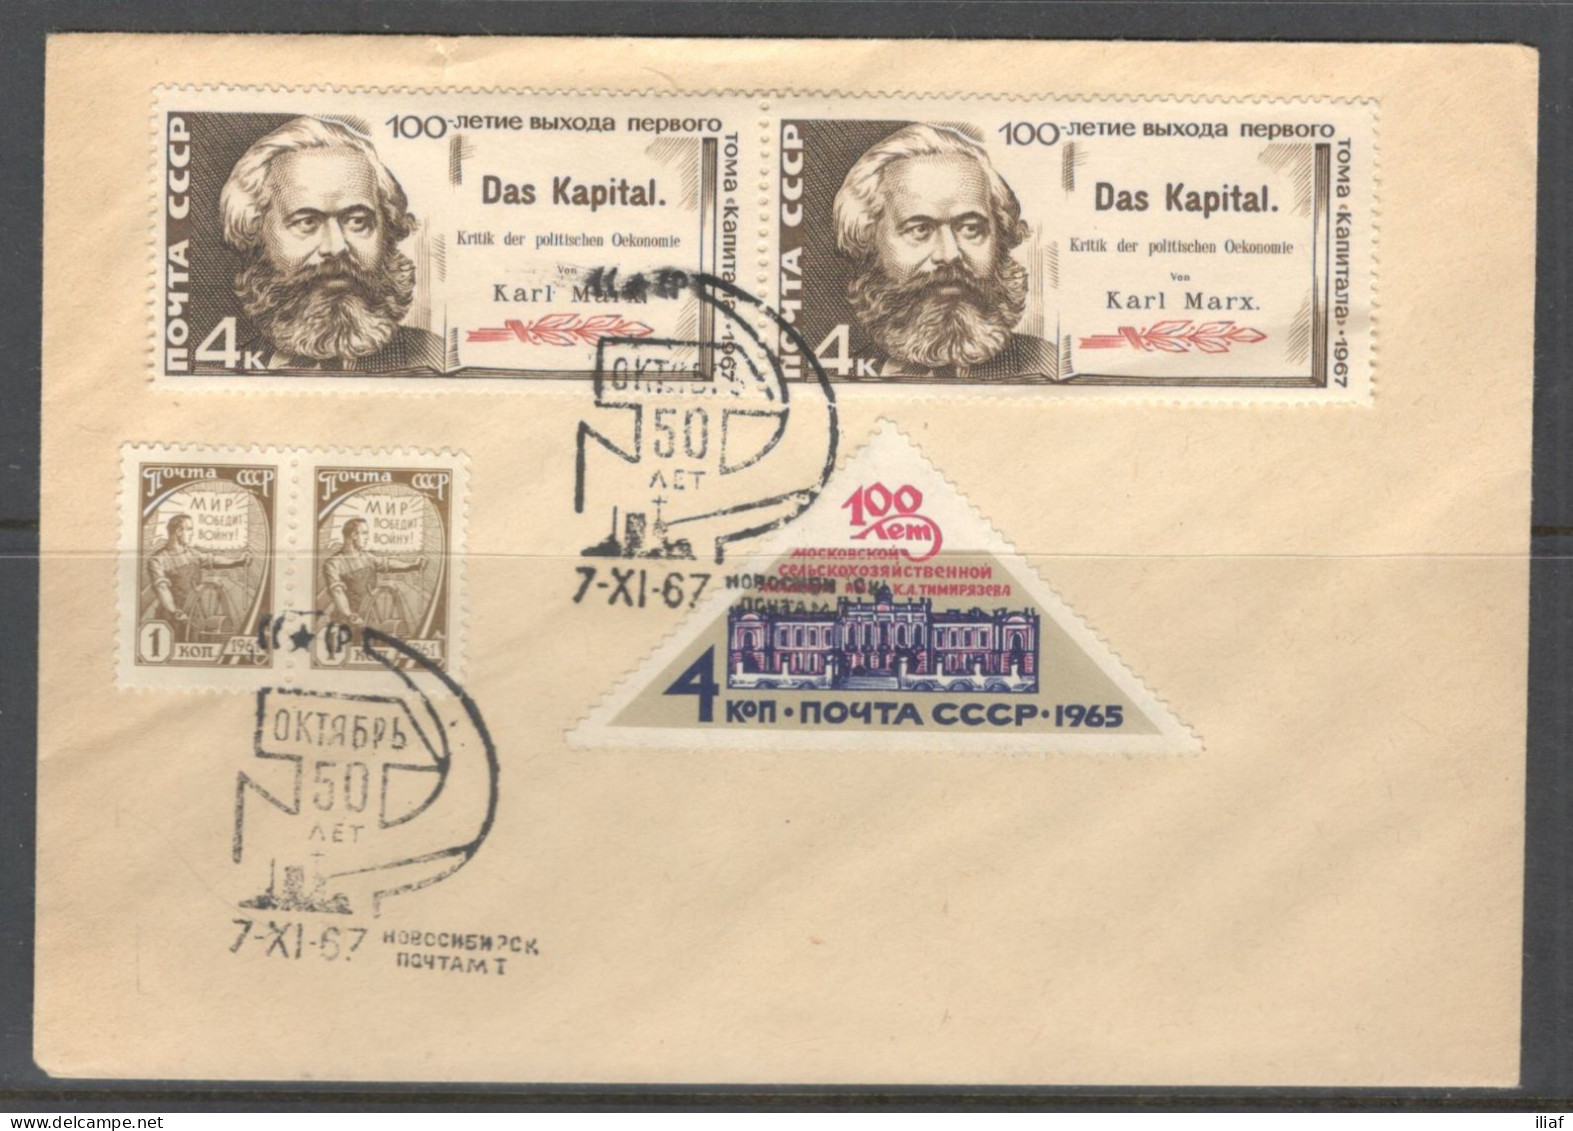 RUSSIA & USSR. 50 Years October.  Illustrated Envelope With Special Cancellation - Covers & Documents